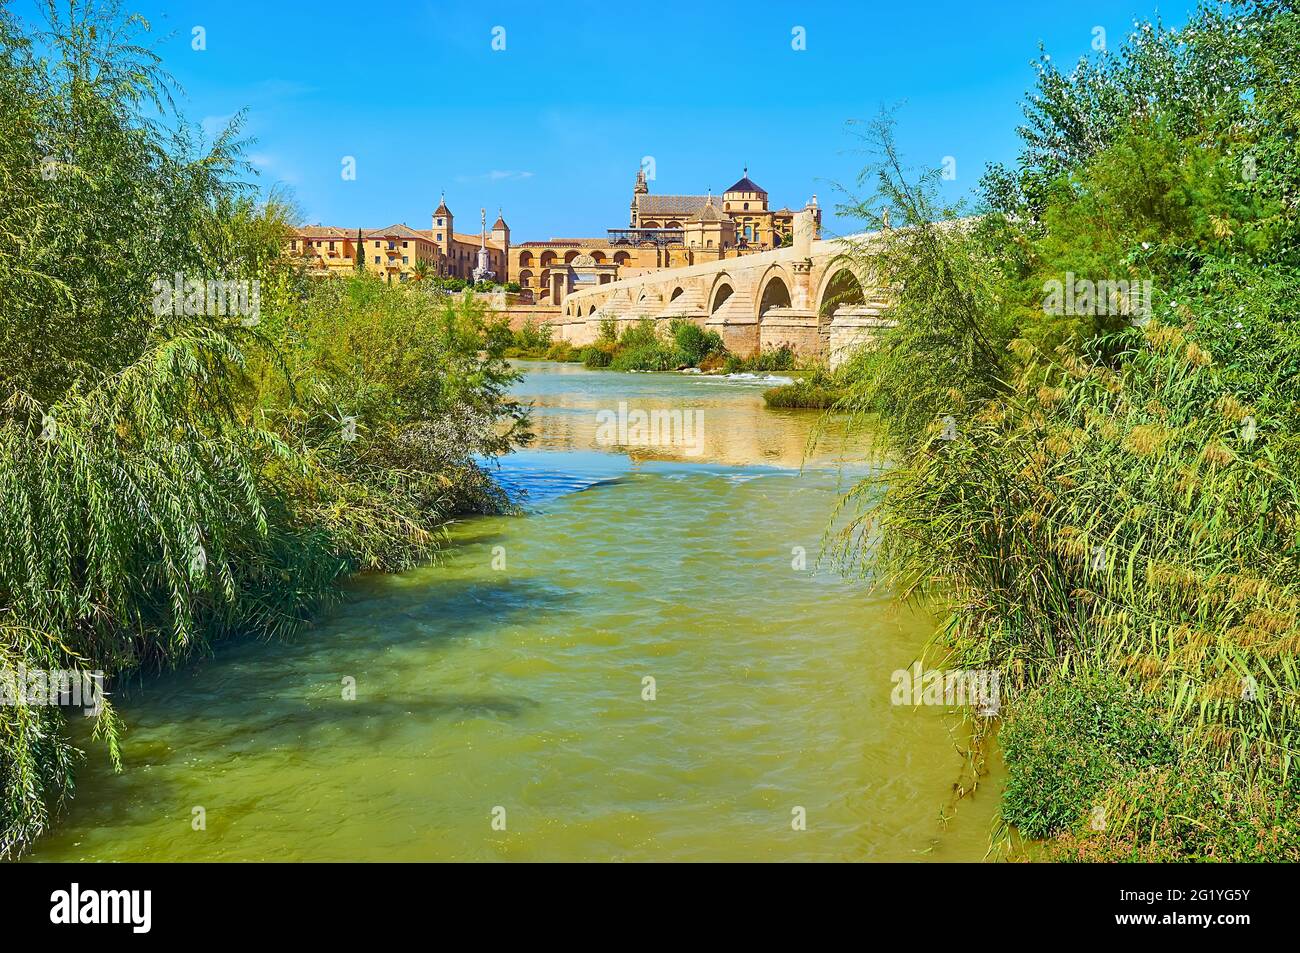 The green park at the bank of Guadalquivir River, next to Roman Bridge, with a view on Mezquita-Catedral (Mosque-Cathedral) on the opposite bank, Cord Stock Photo